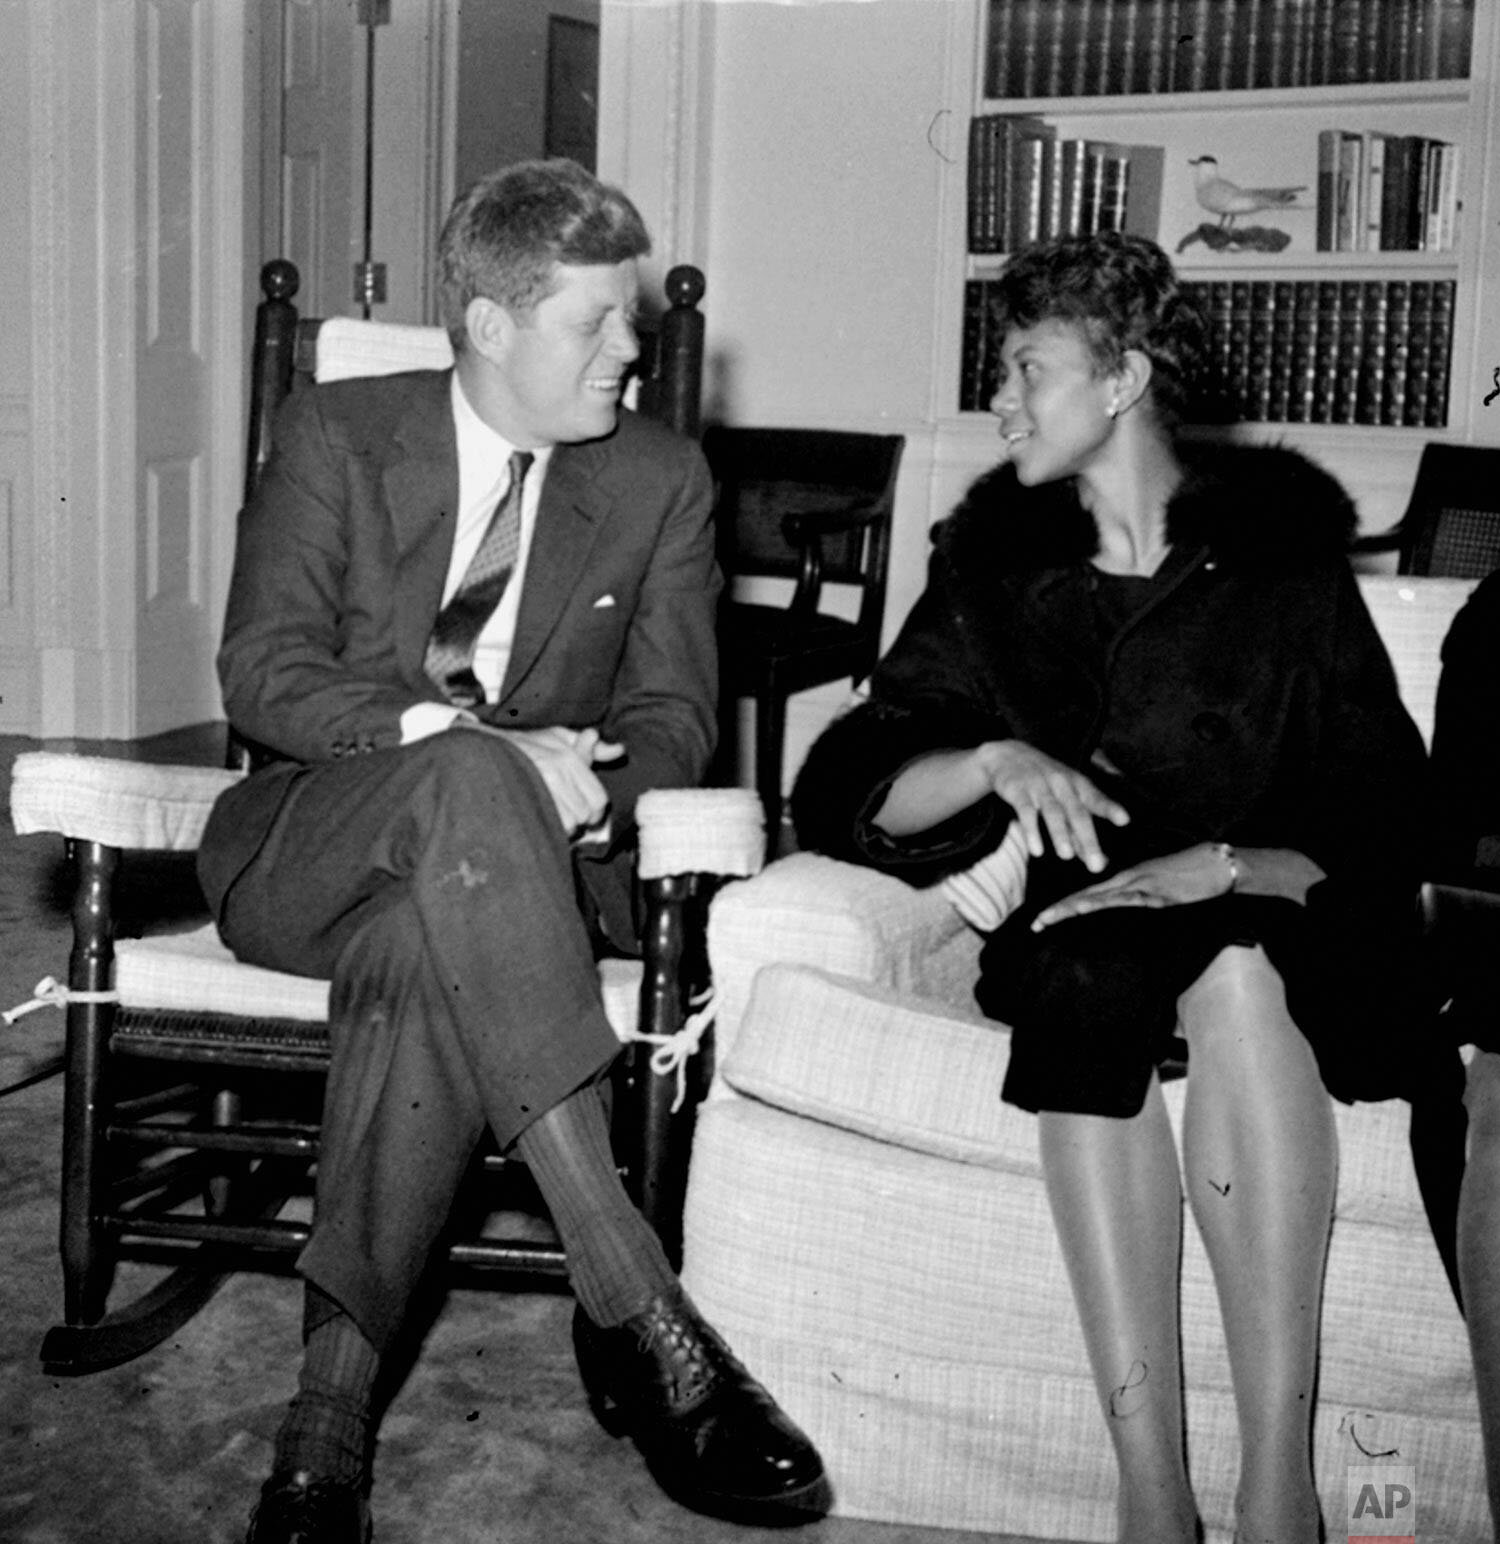  President John F. Kennedy chats in his White House office April 14, 1961, with Wilma Rudolph, winner of three gold medals in the 1960 Olympic games.  Wilma, a student at Tennessee State, won the 100- and 200-meter races in Rome and was the anchor ru